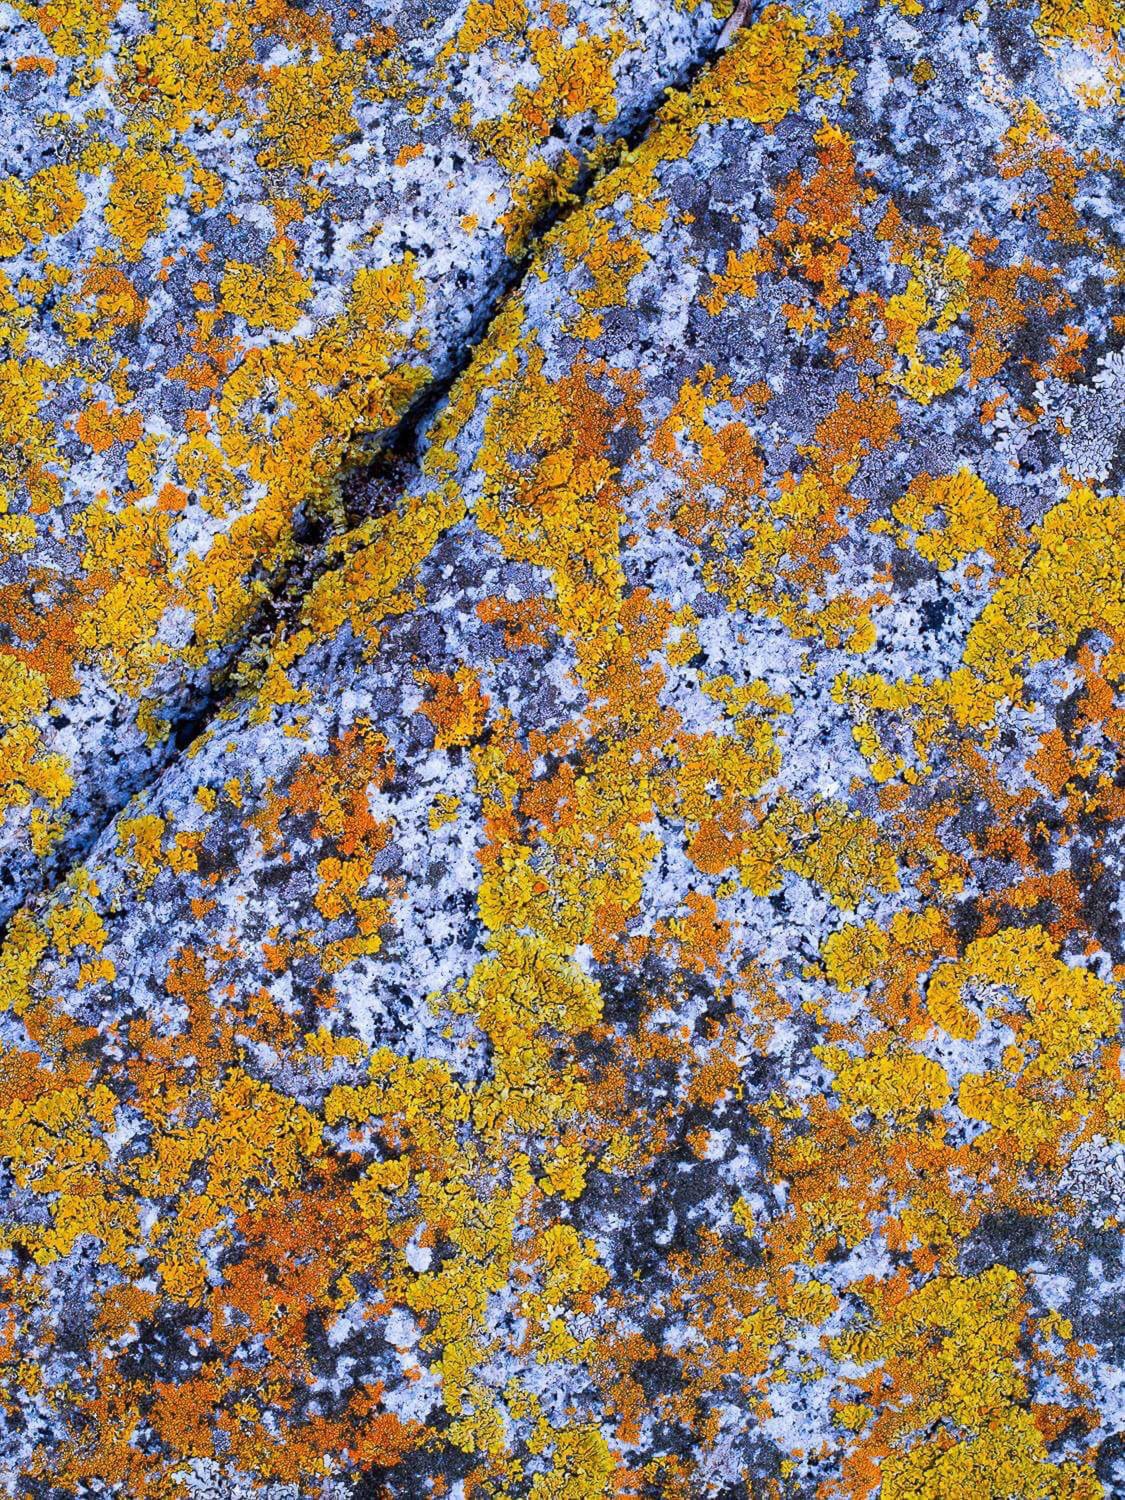 The beautiful rocky surface with a lot of colorful autumn leaves fallen, Lichen on rock, Bay of Fires